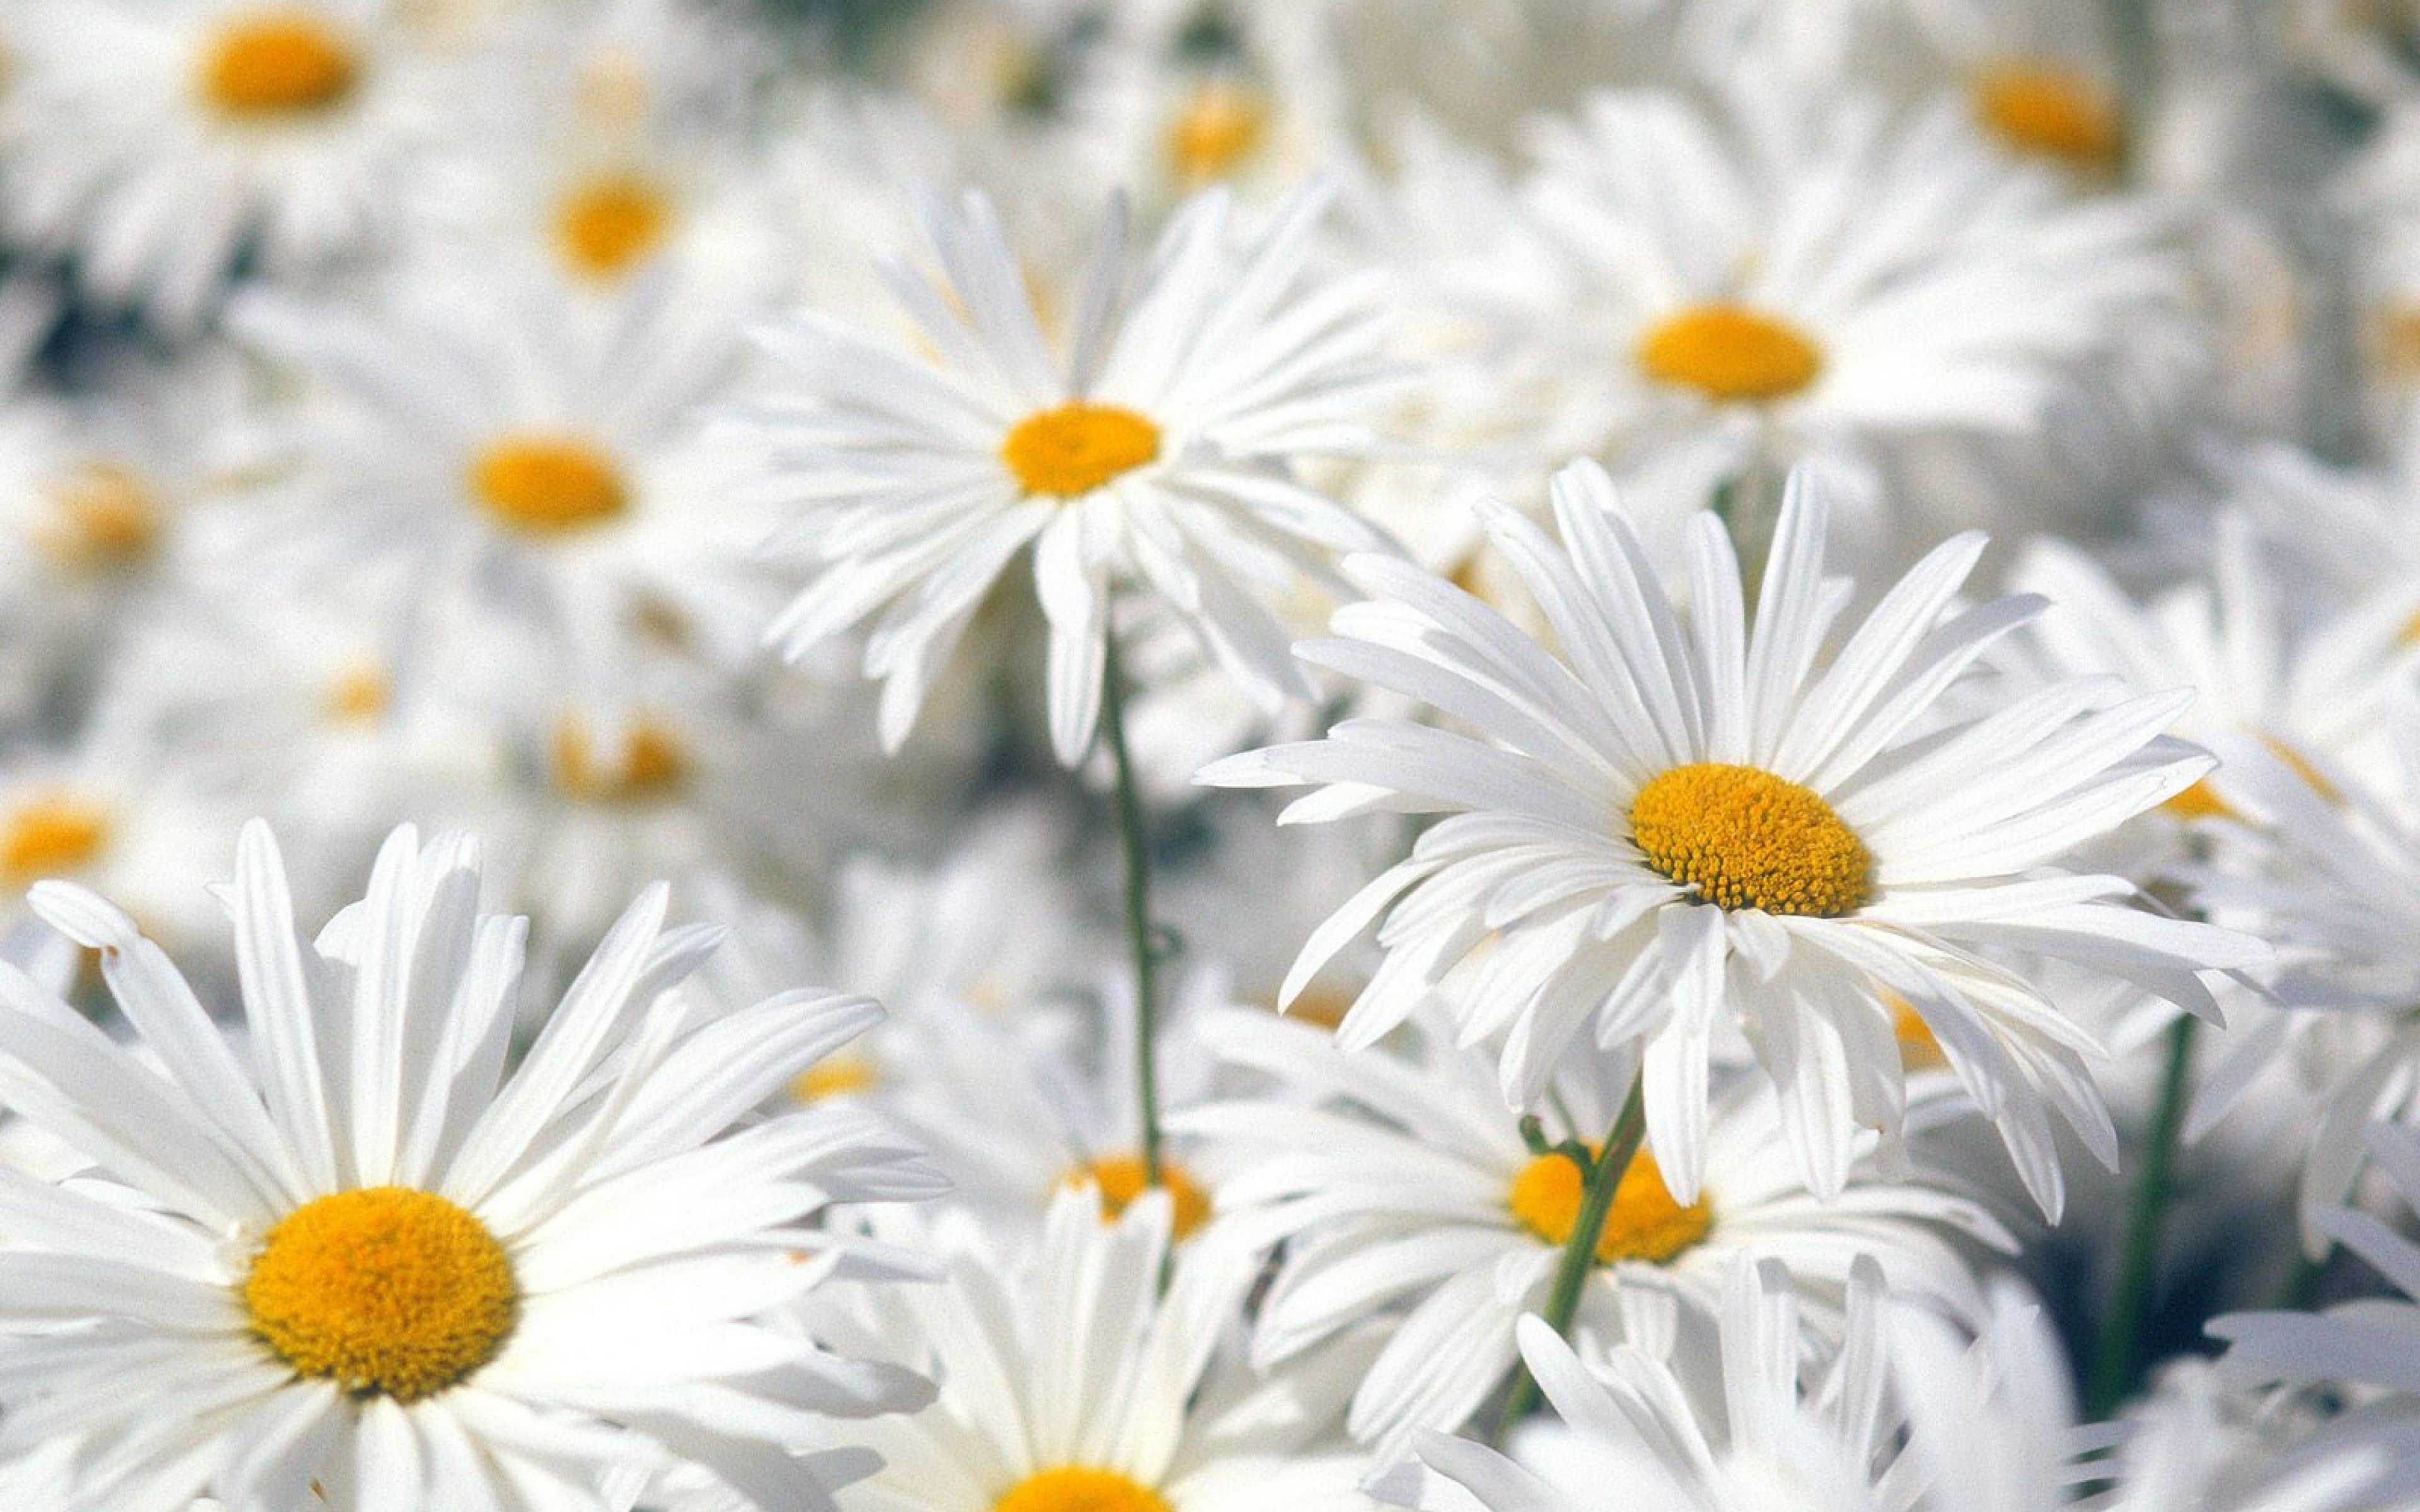 Download Wallpaper 3840x2400 Daisies, Flowers, Field, Plant Ultra HD 4K HD Background. Spring flowers wallpaper, Daisy wallpaper, Spring flowers background